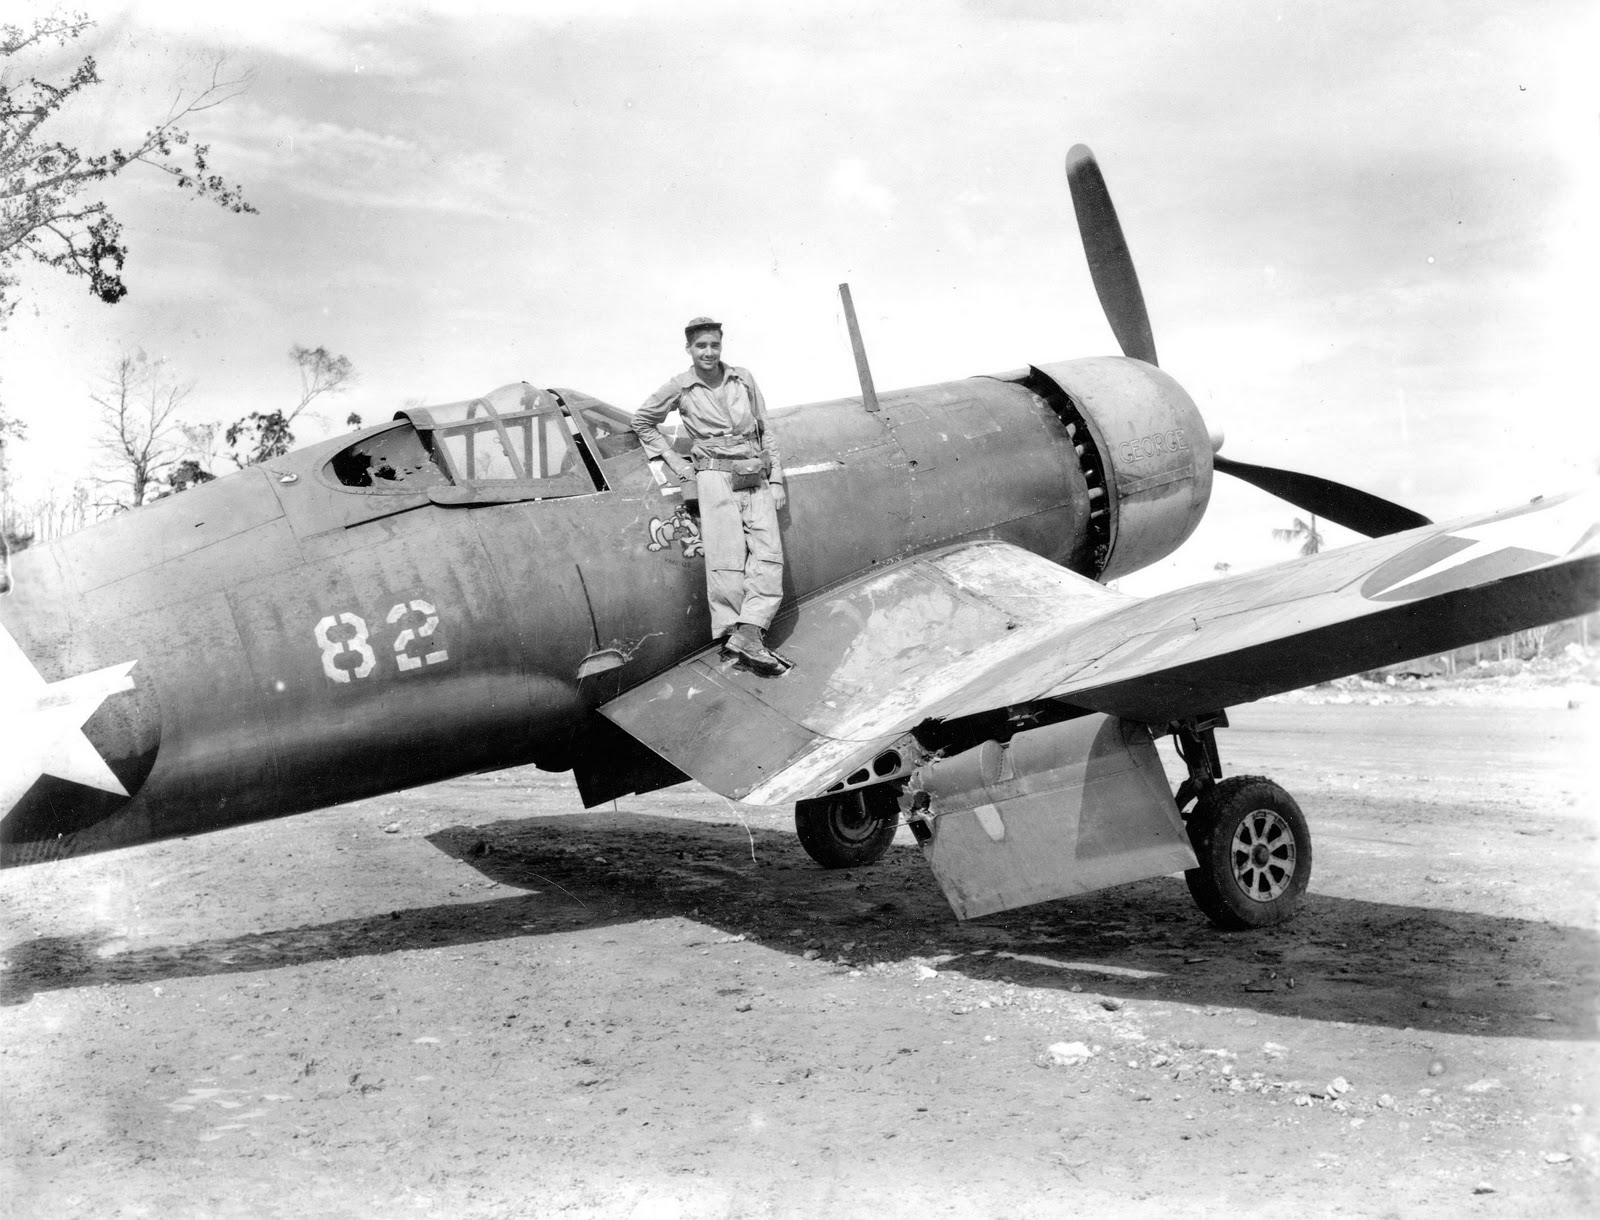 2Lt Harry S Huidekoper, USMCR of VMF-213 poses aboard the hulk of F4U-1 Corsair “George,” Munda Airstrip, New Georgia, Solomon Islands, Sept 1943. This aircraft previously flew with VMF-122.